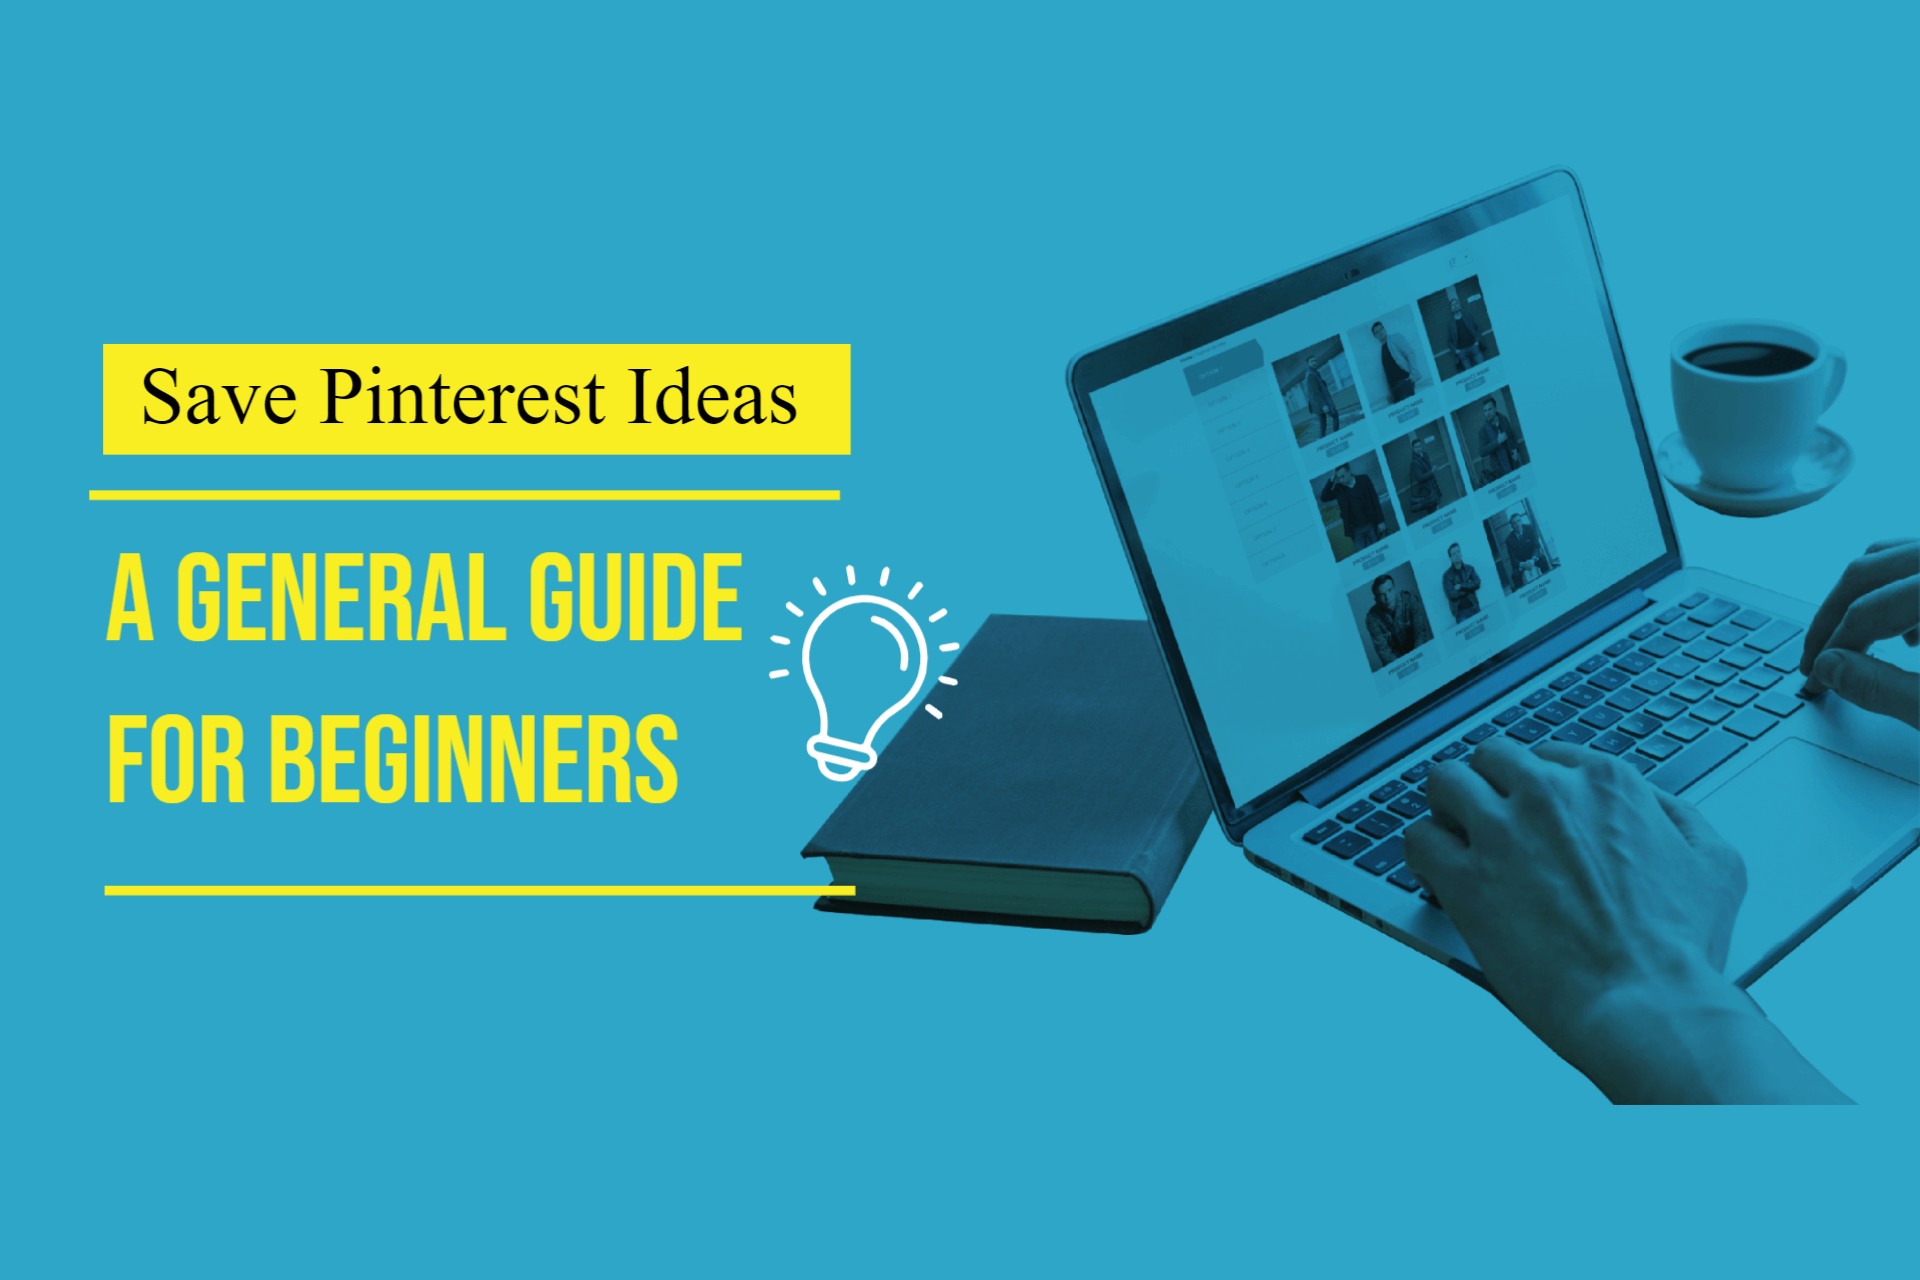 Save Pinterest Ideas: A General Guide for Beginners